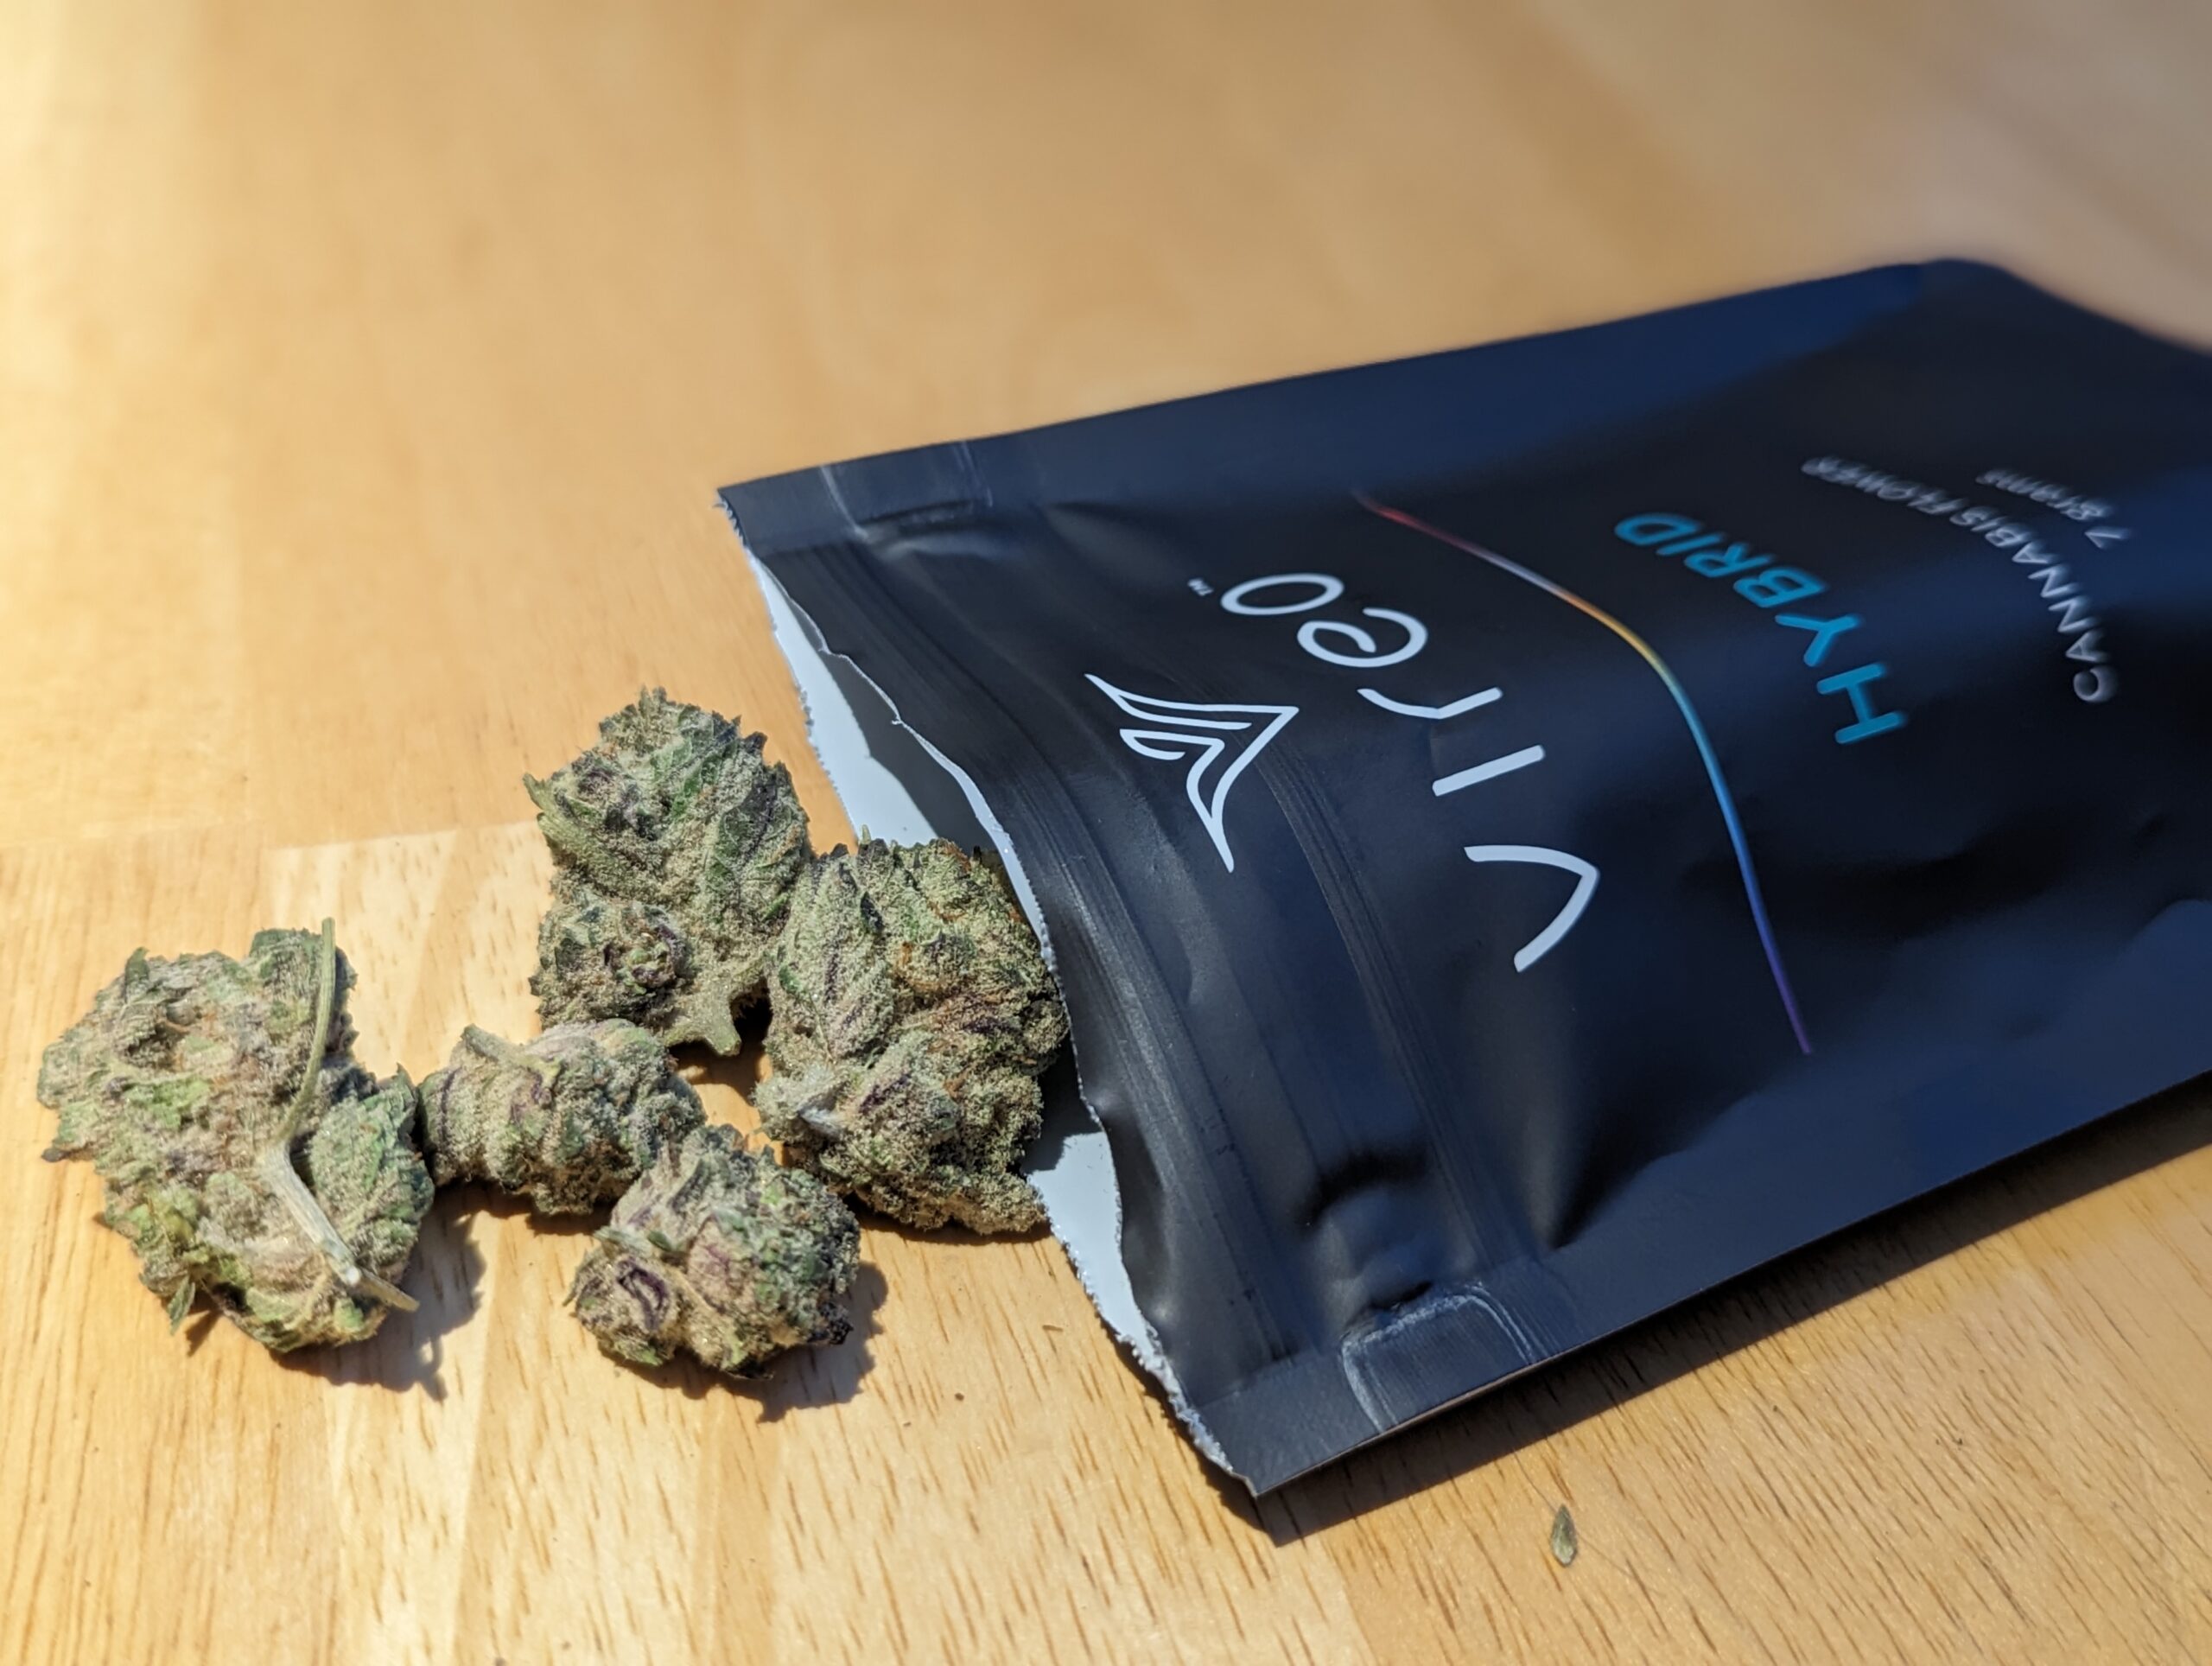 A photo of a package of marijuana flower with several buds spilling onto the table.